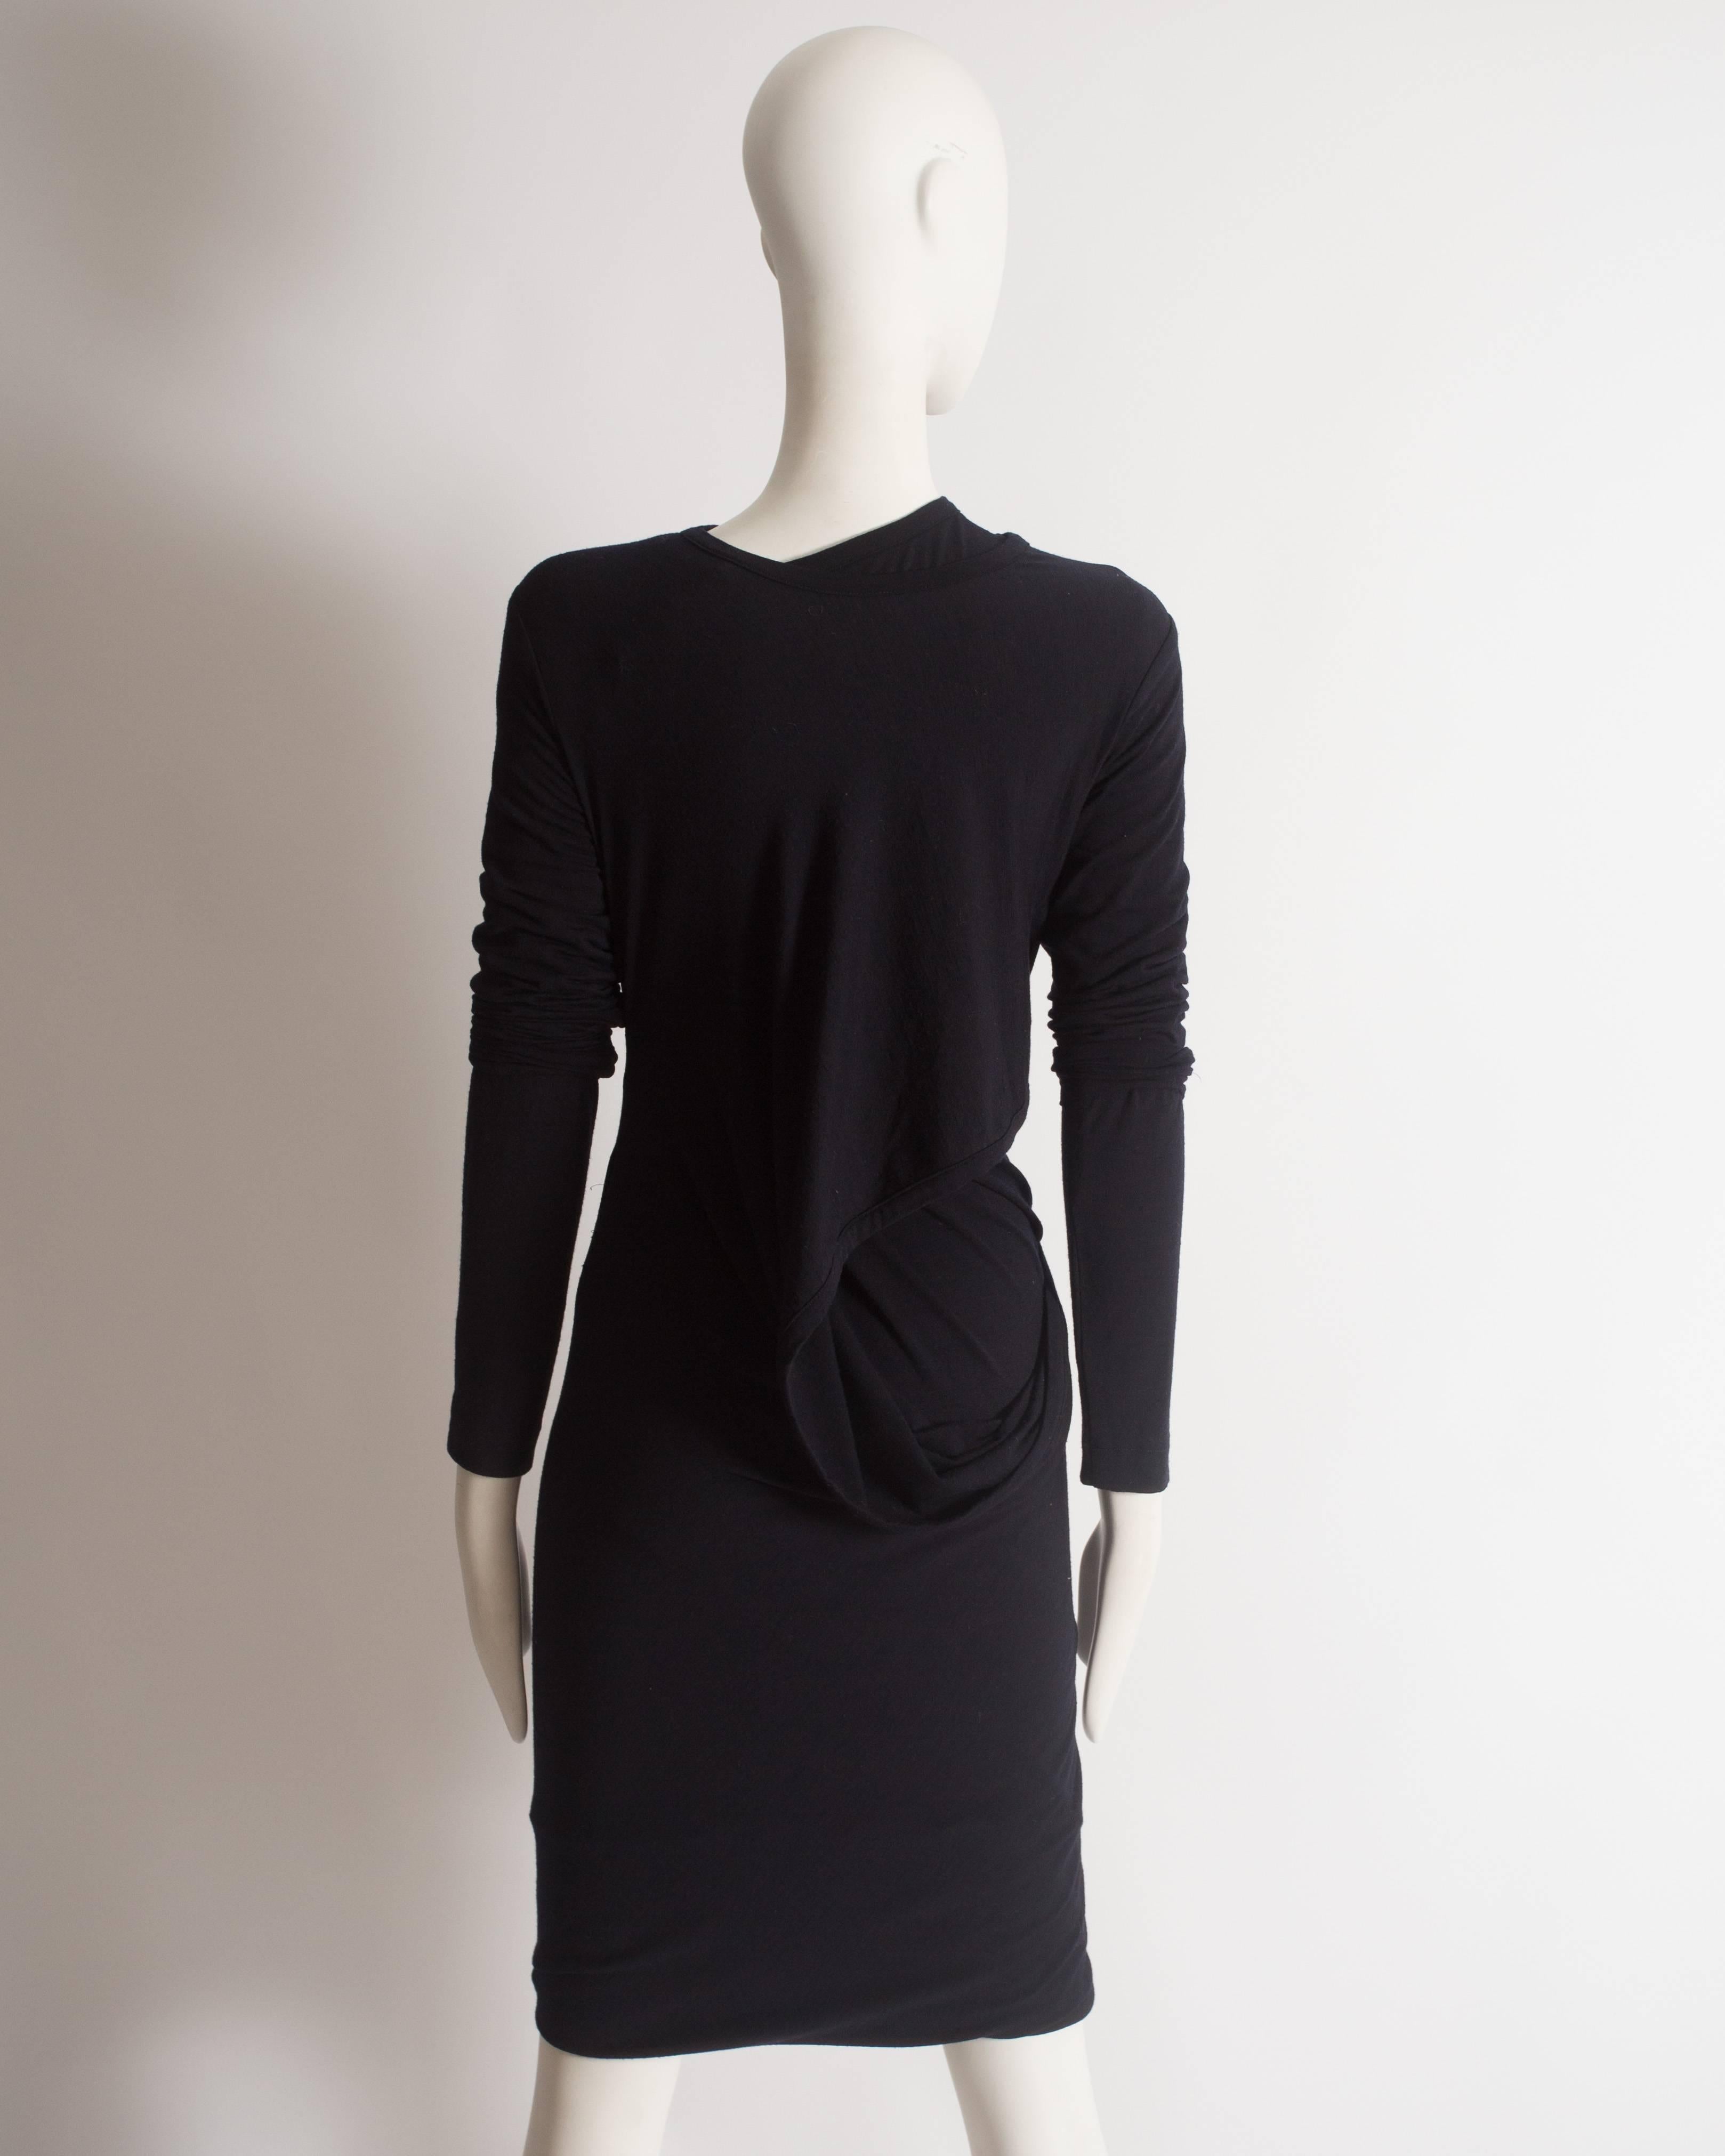 Comme des Garcons 'Punk Chic' black knitted dress, circa 1991 2